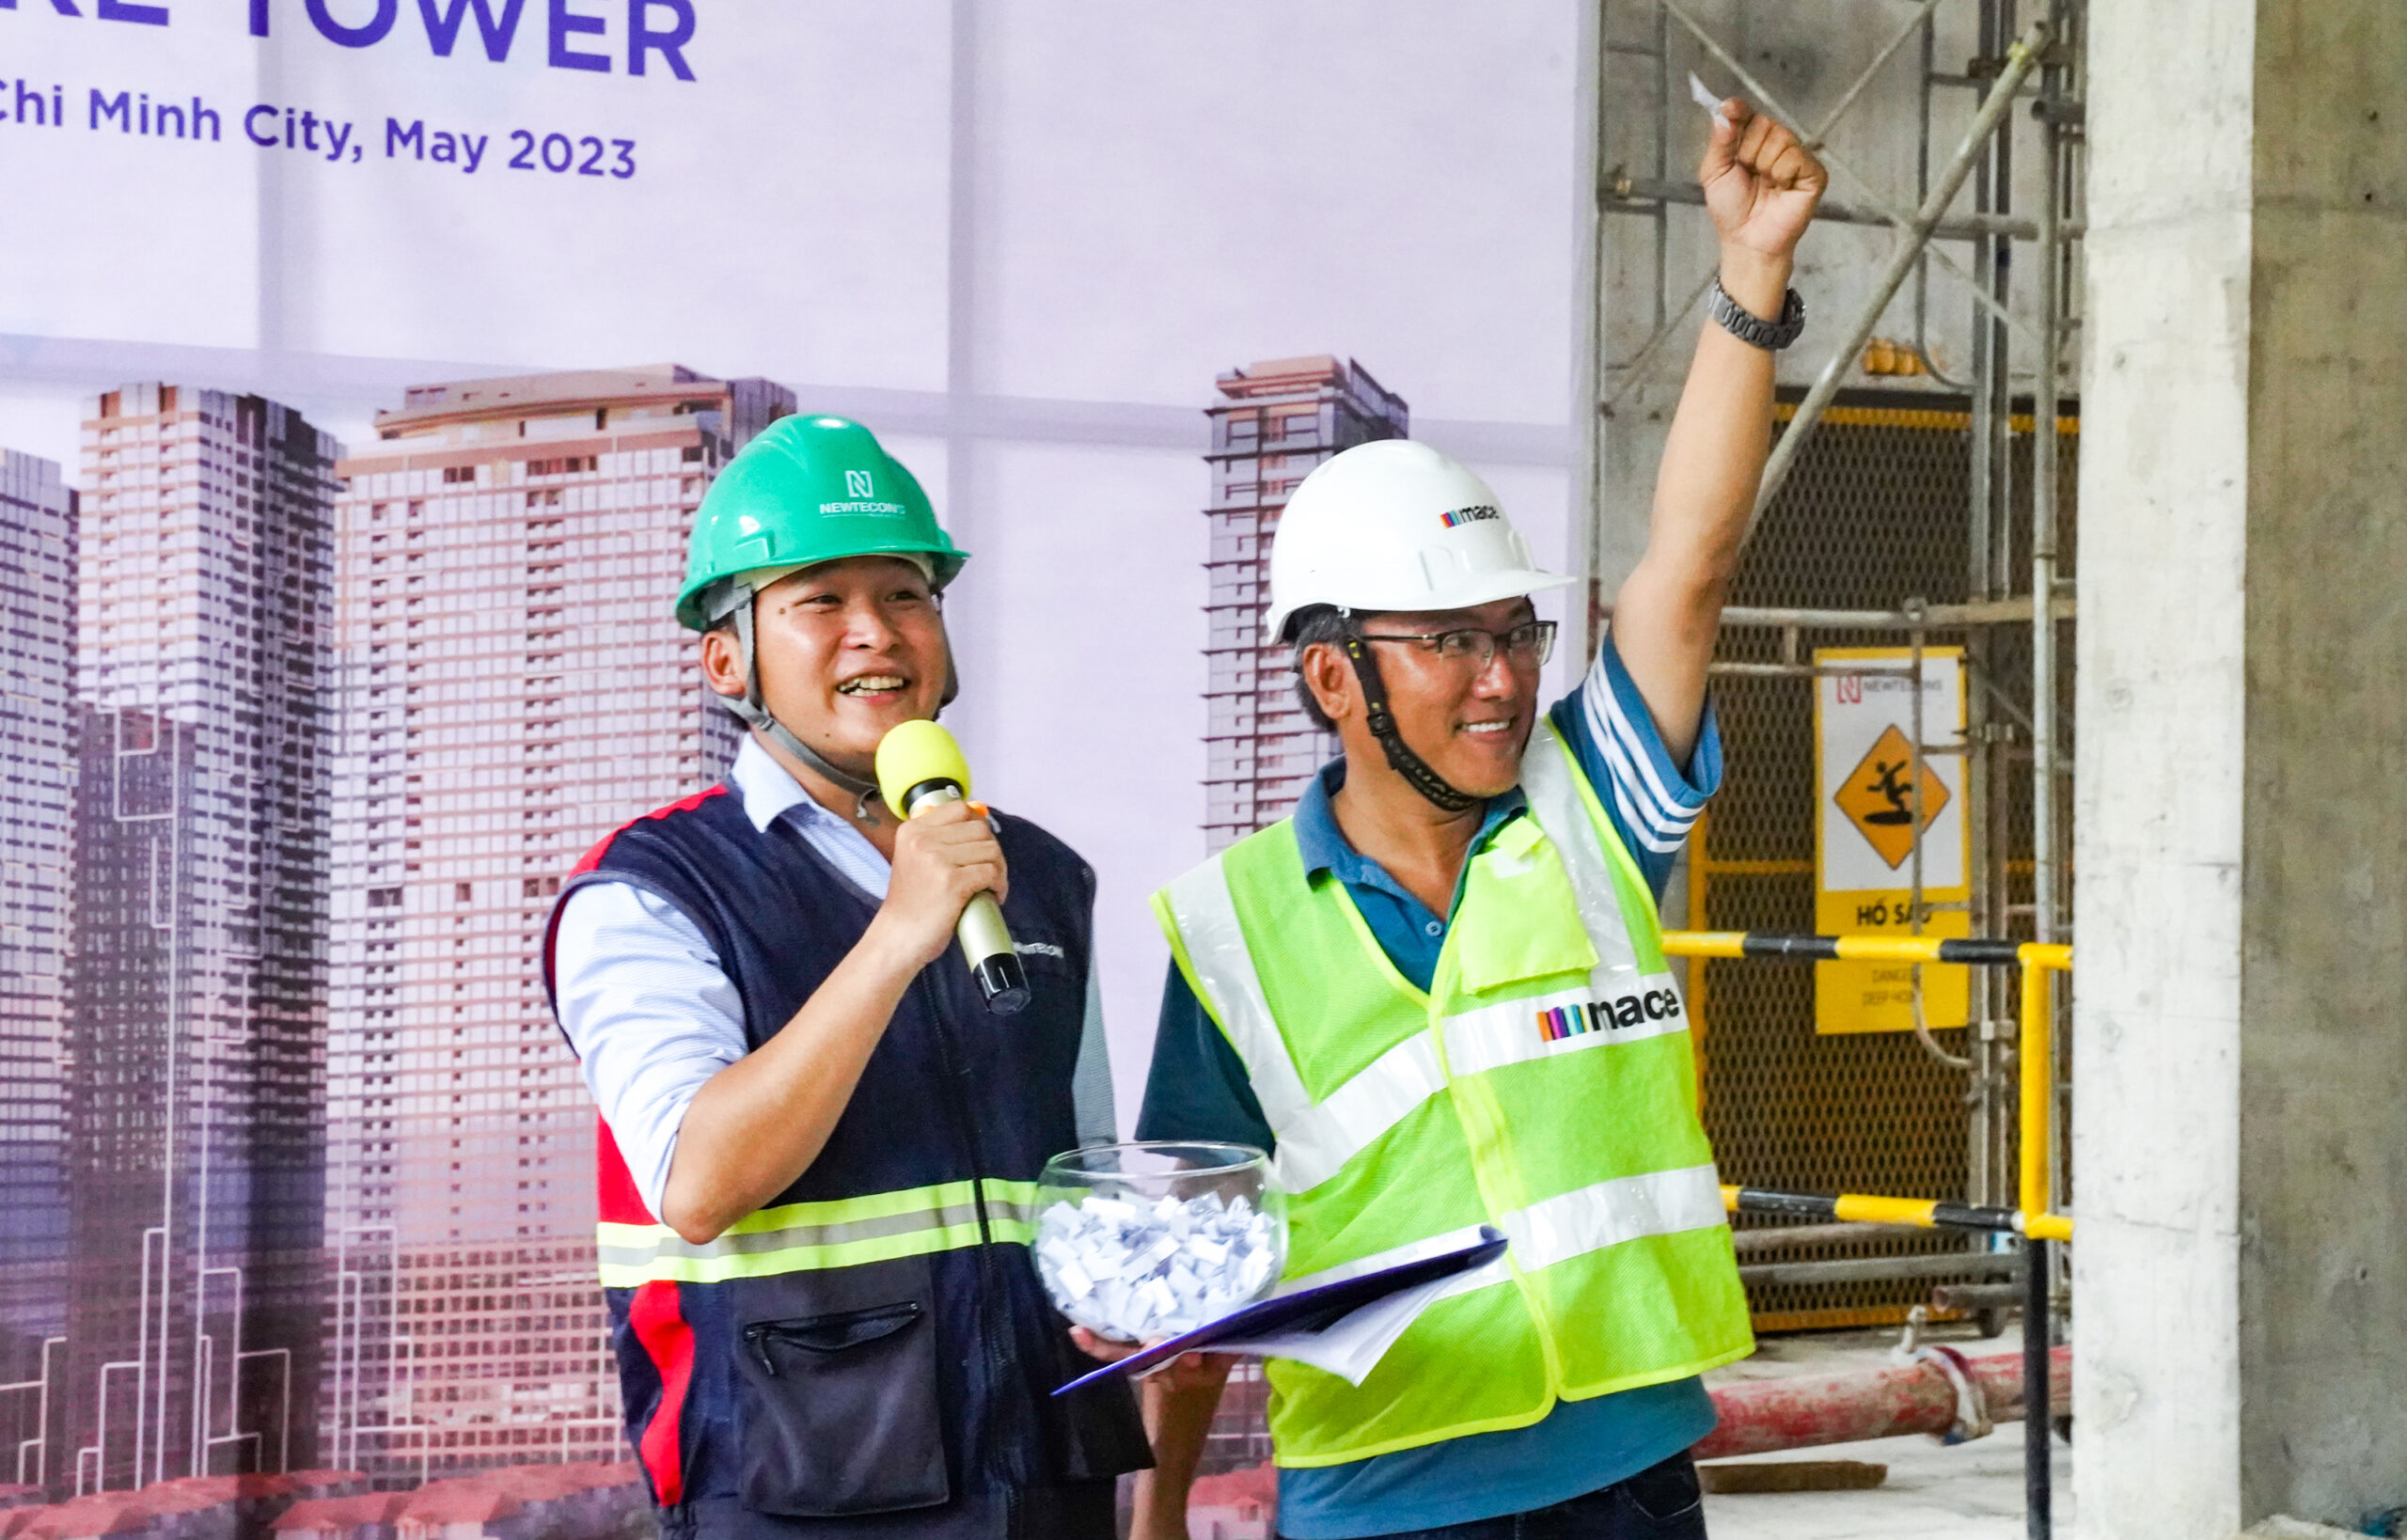 Congratulations to Grand Marina, Saigon project with Lake building reaching 3 million safe hours